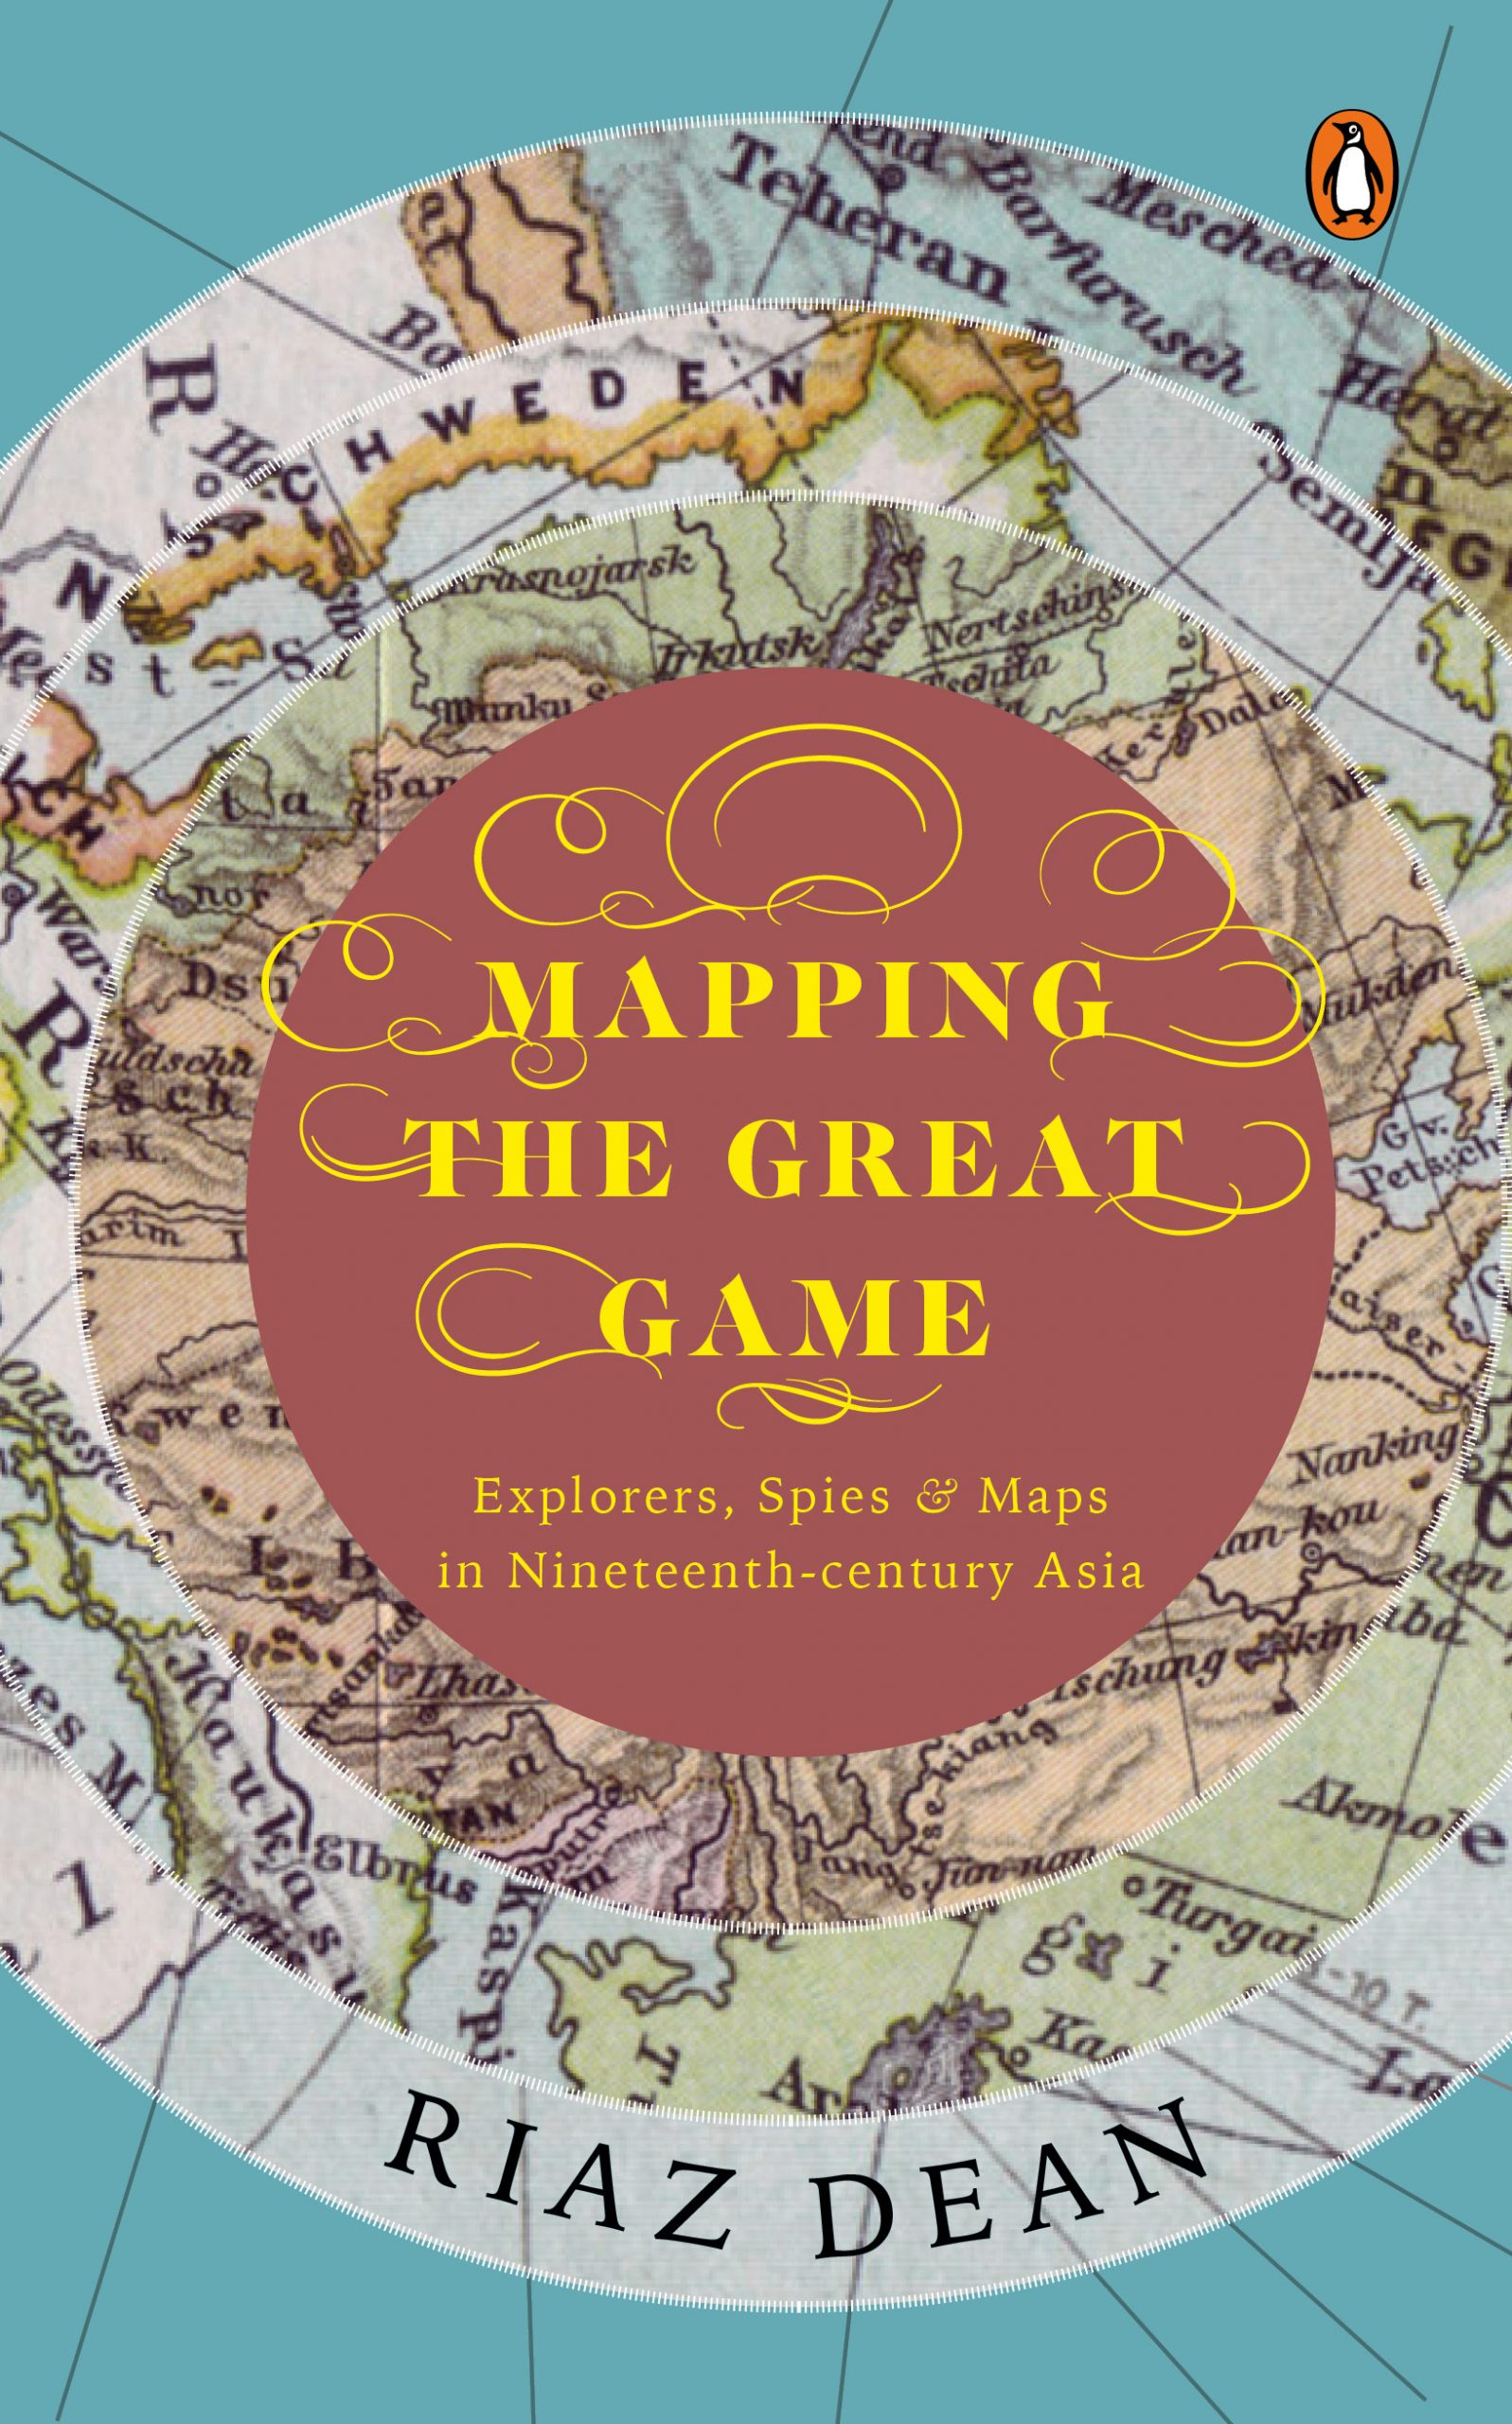 You are currently viewing Mapping the Great Game: Explorers, Spies & Maps in Nineteenth-century Asia by Riaz Dean